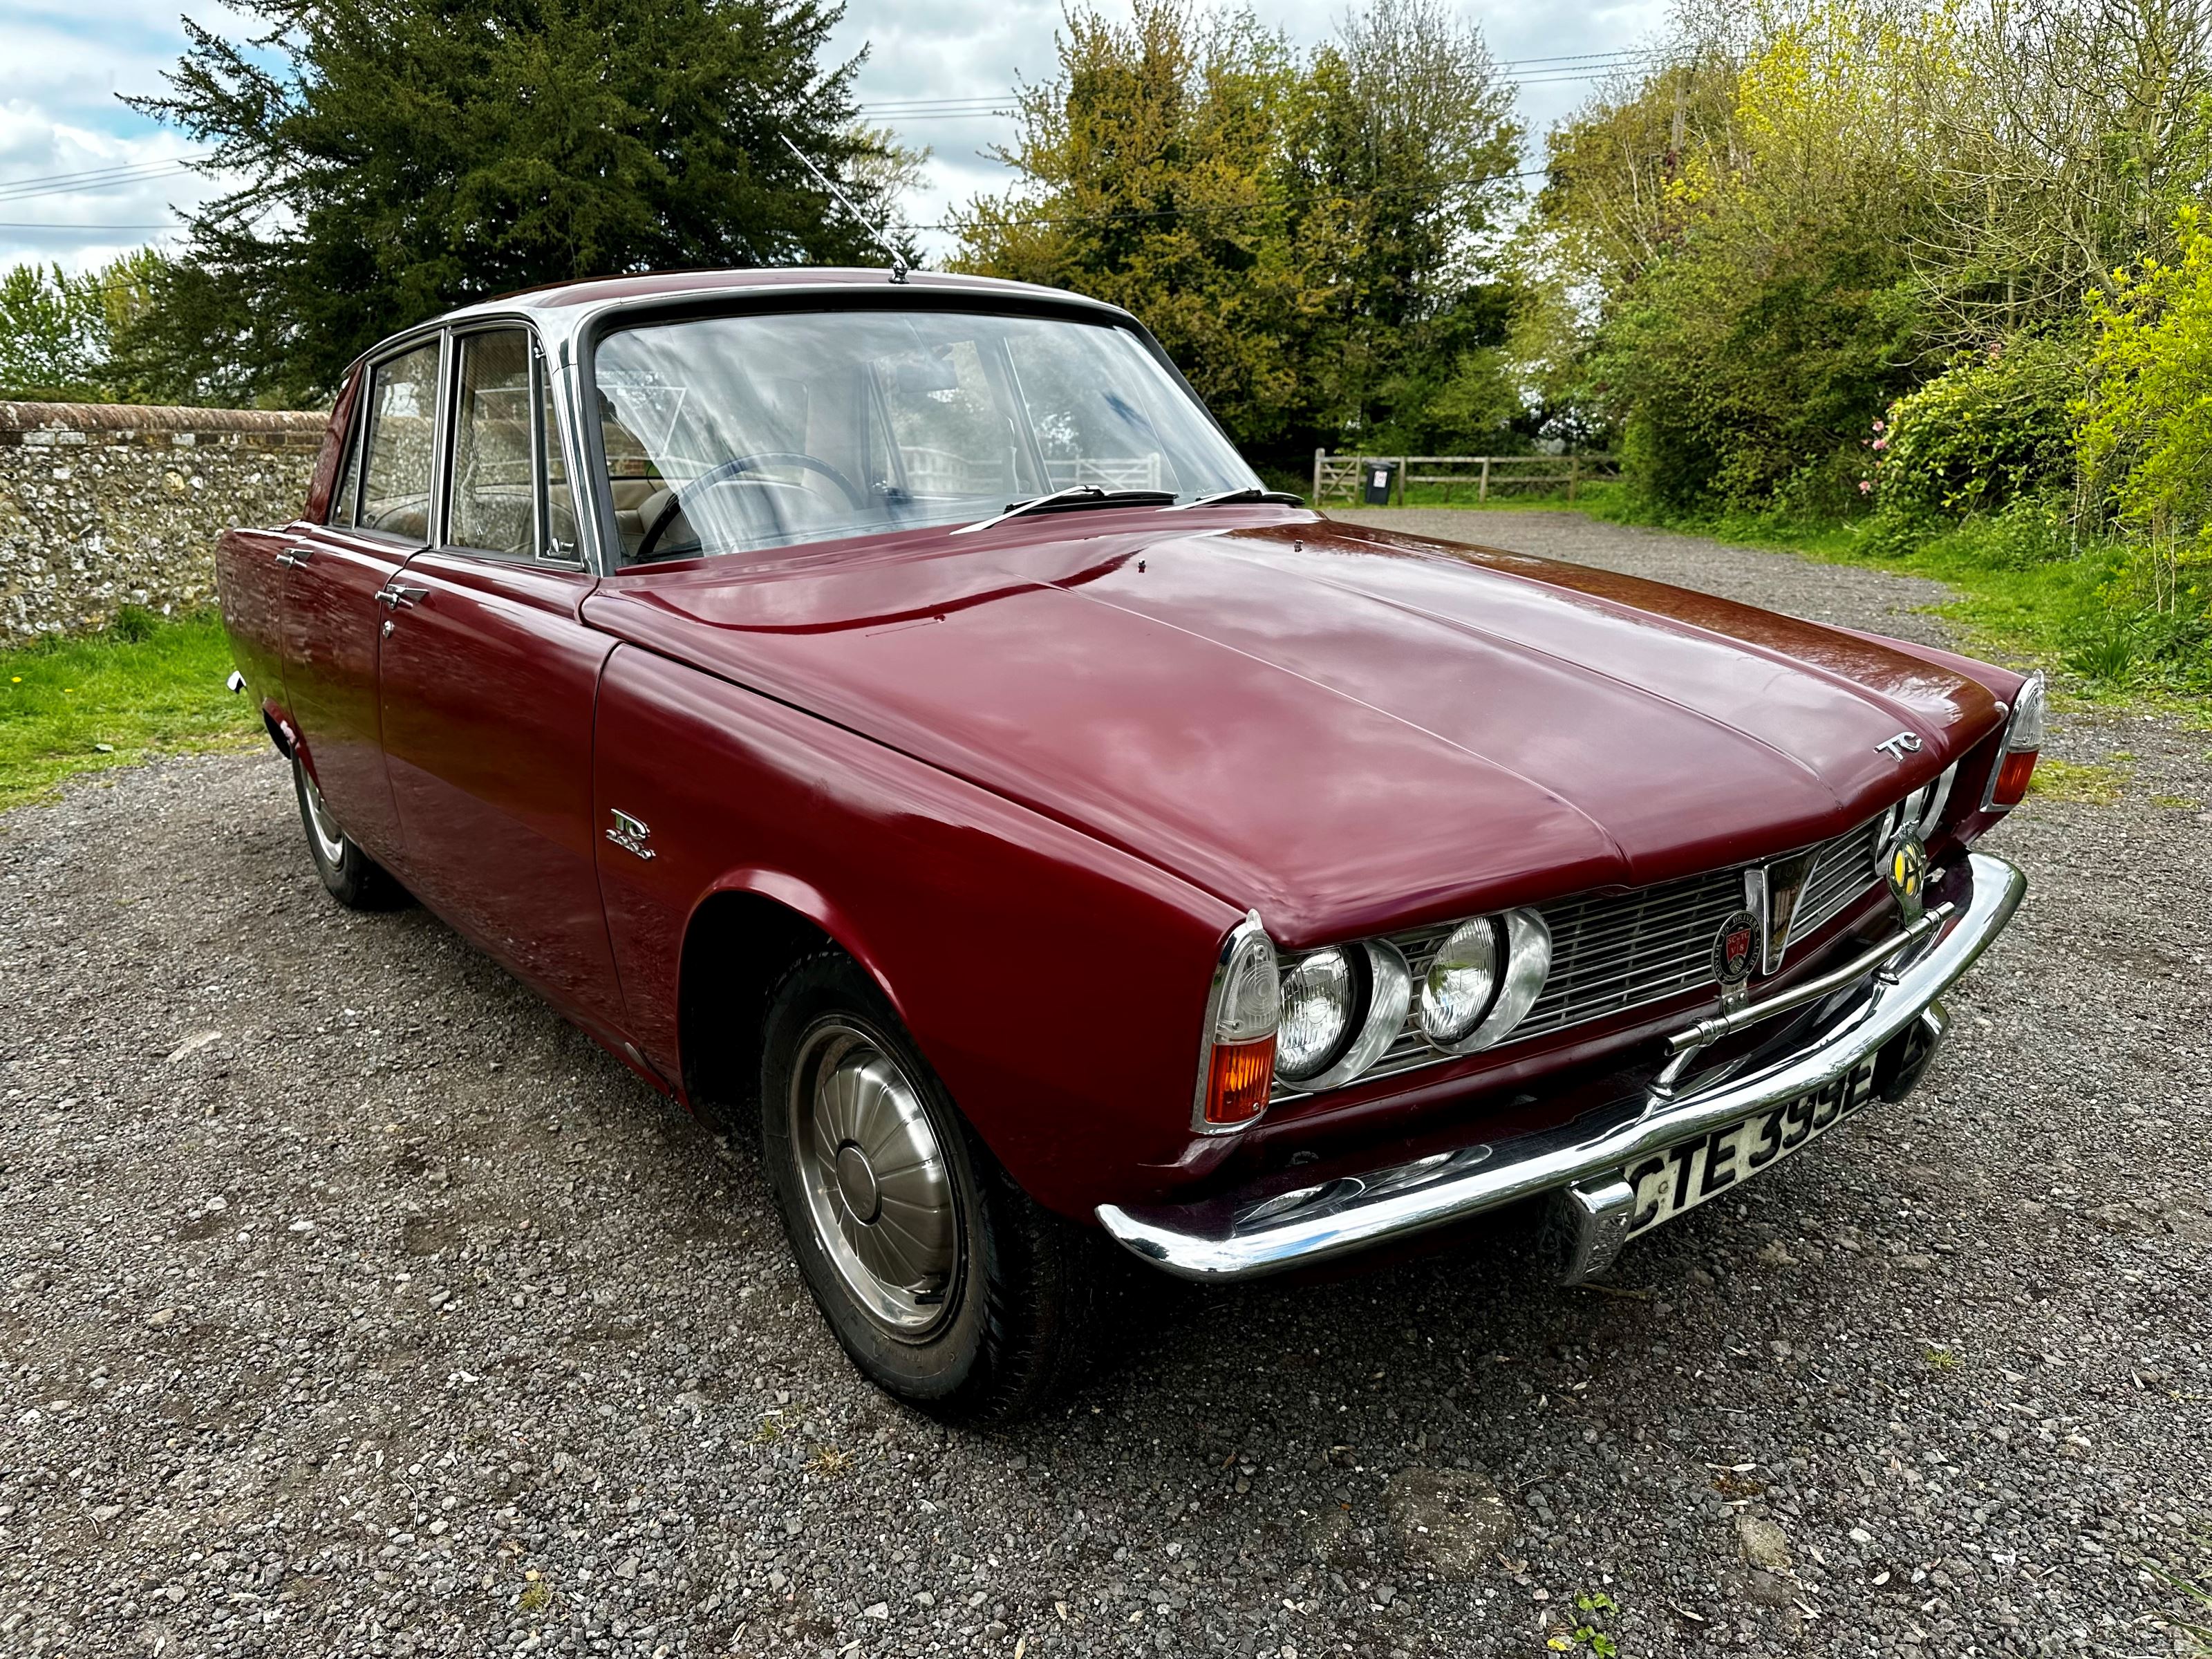 Rover p6 zuiefvp 33bw 4f8d6vps